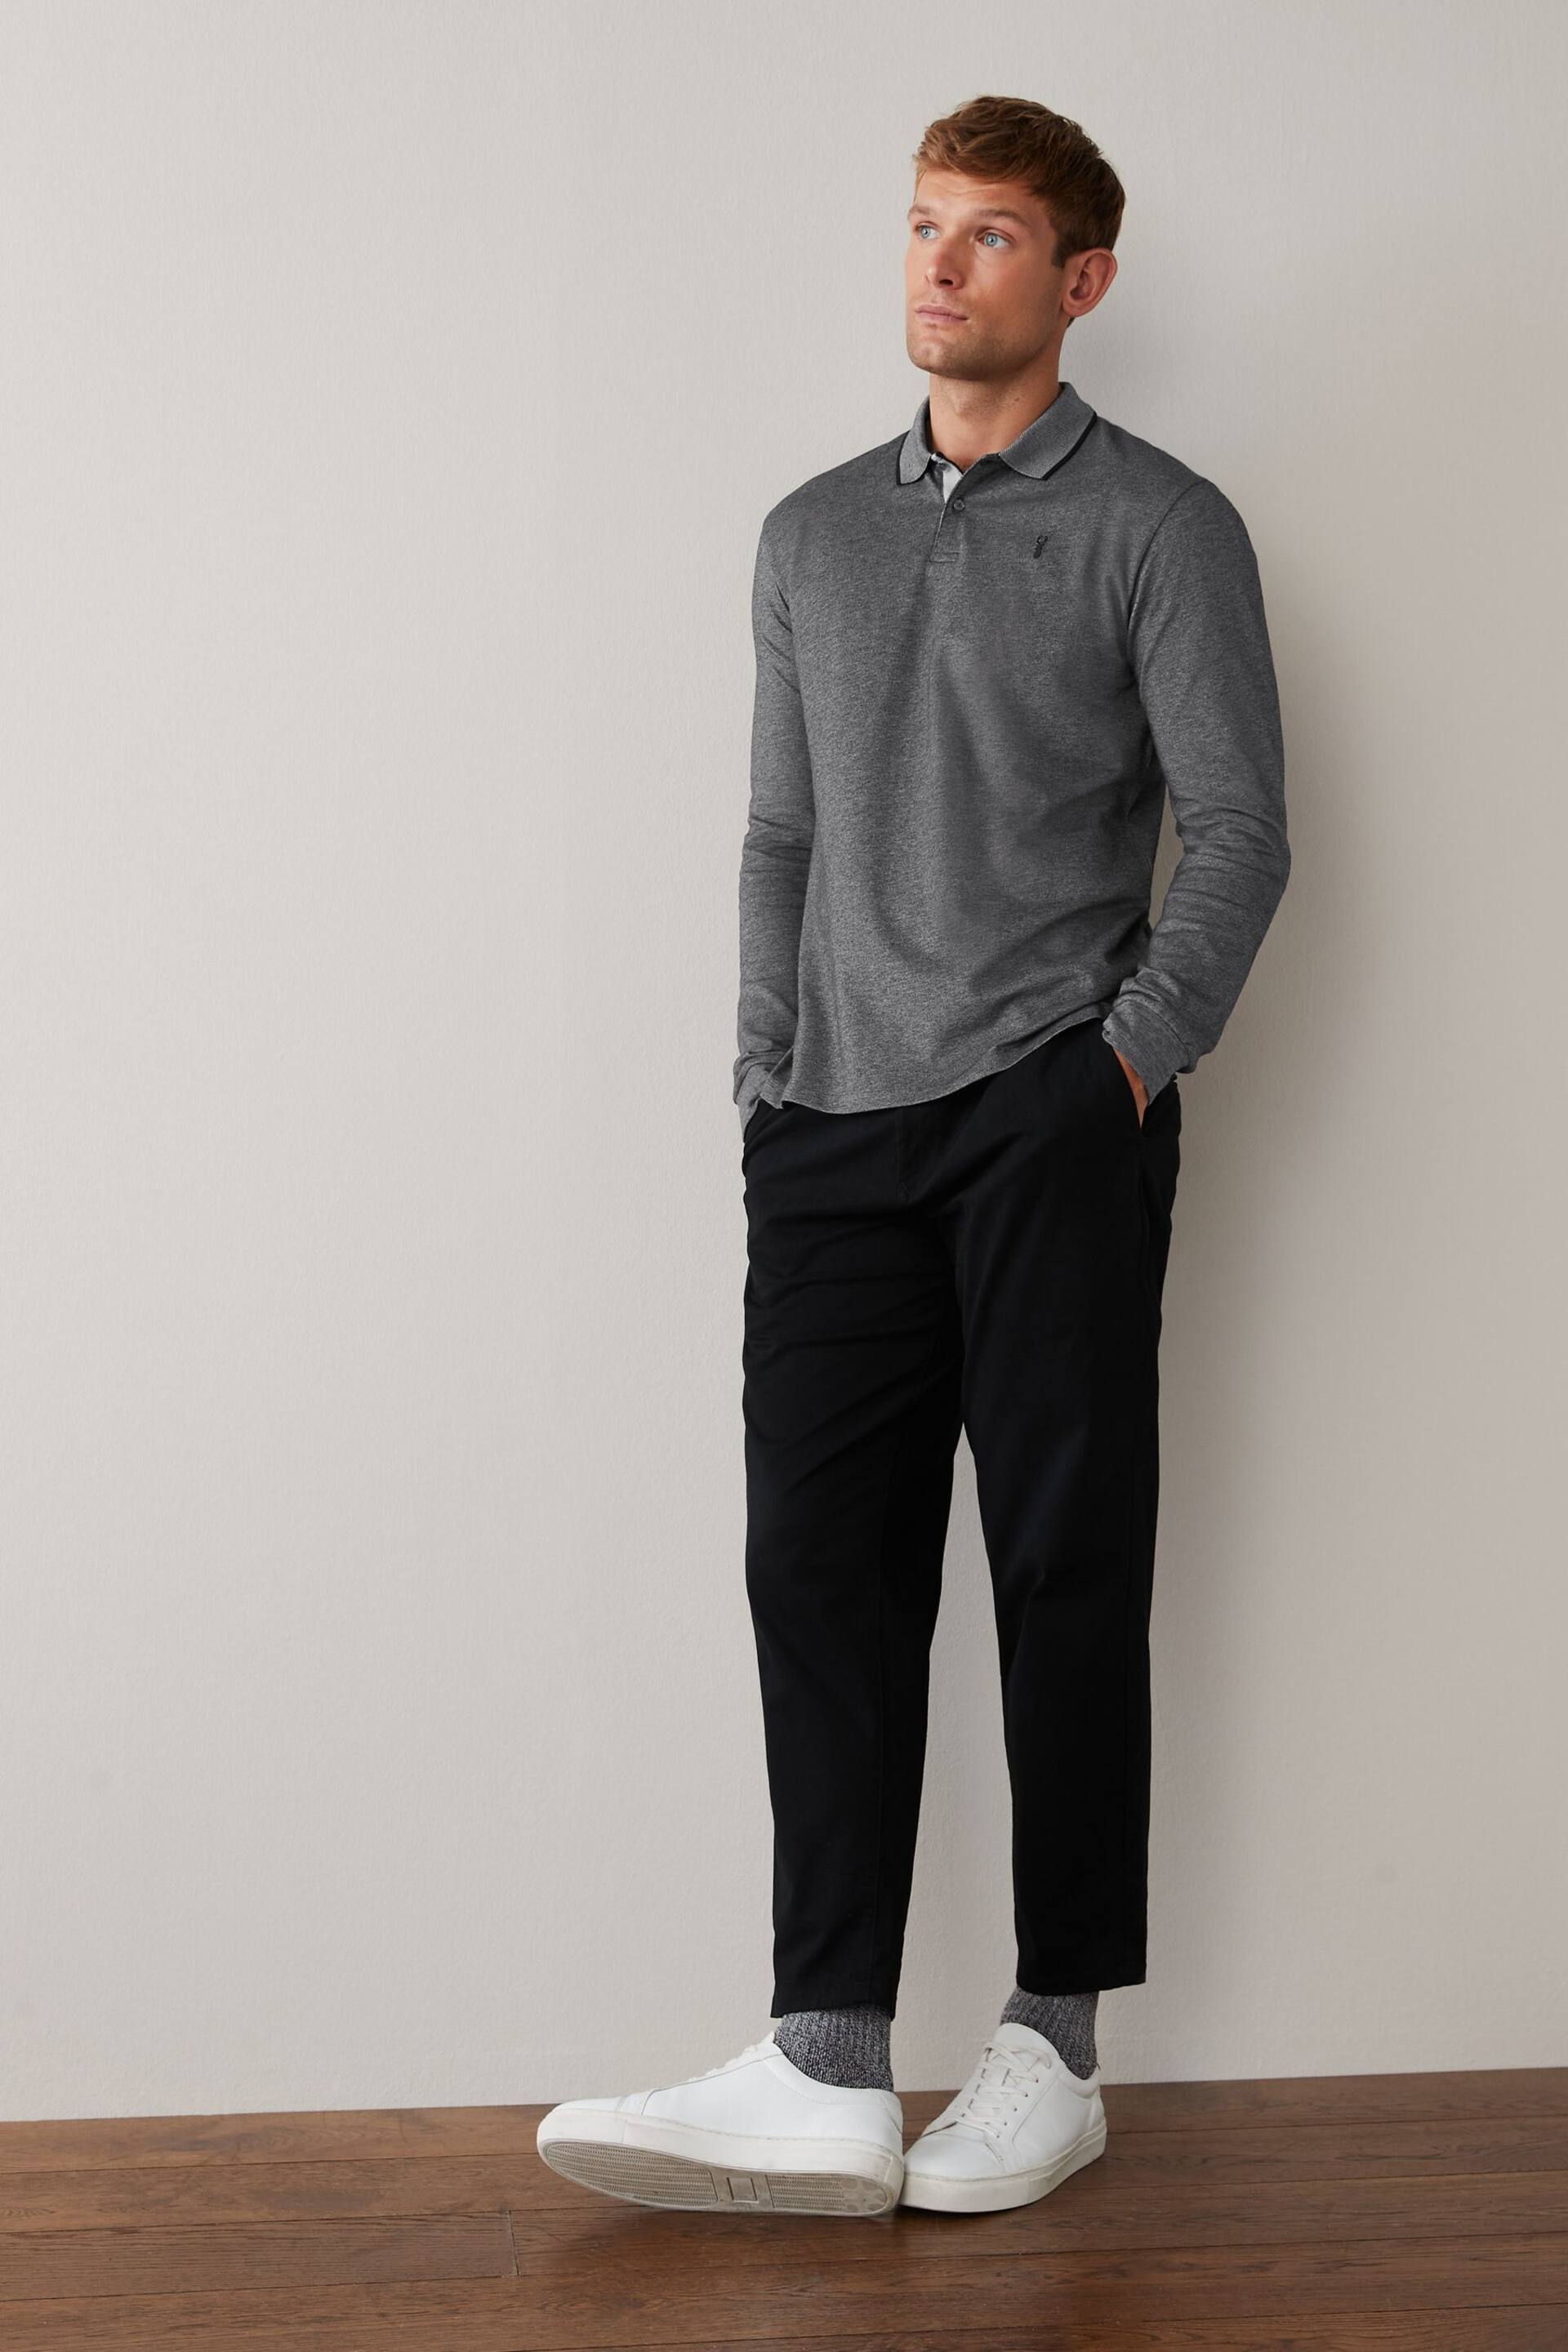 Charcoal Grey Oxford Long Sleeve Pique Polo Shirt - Image 2 of 5